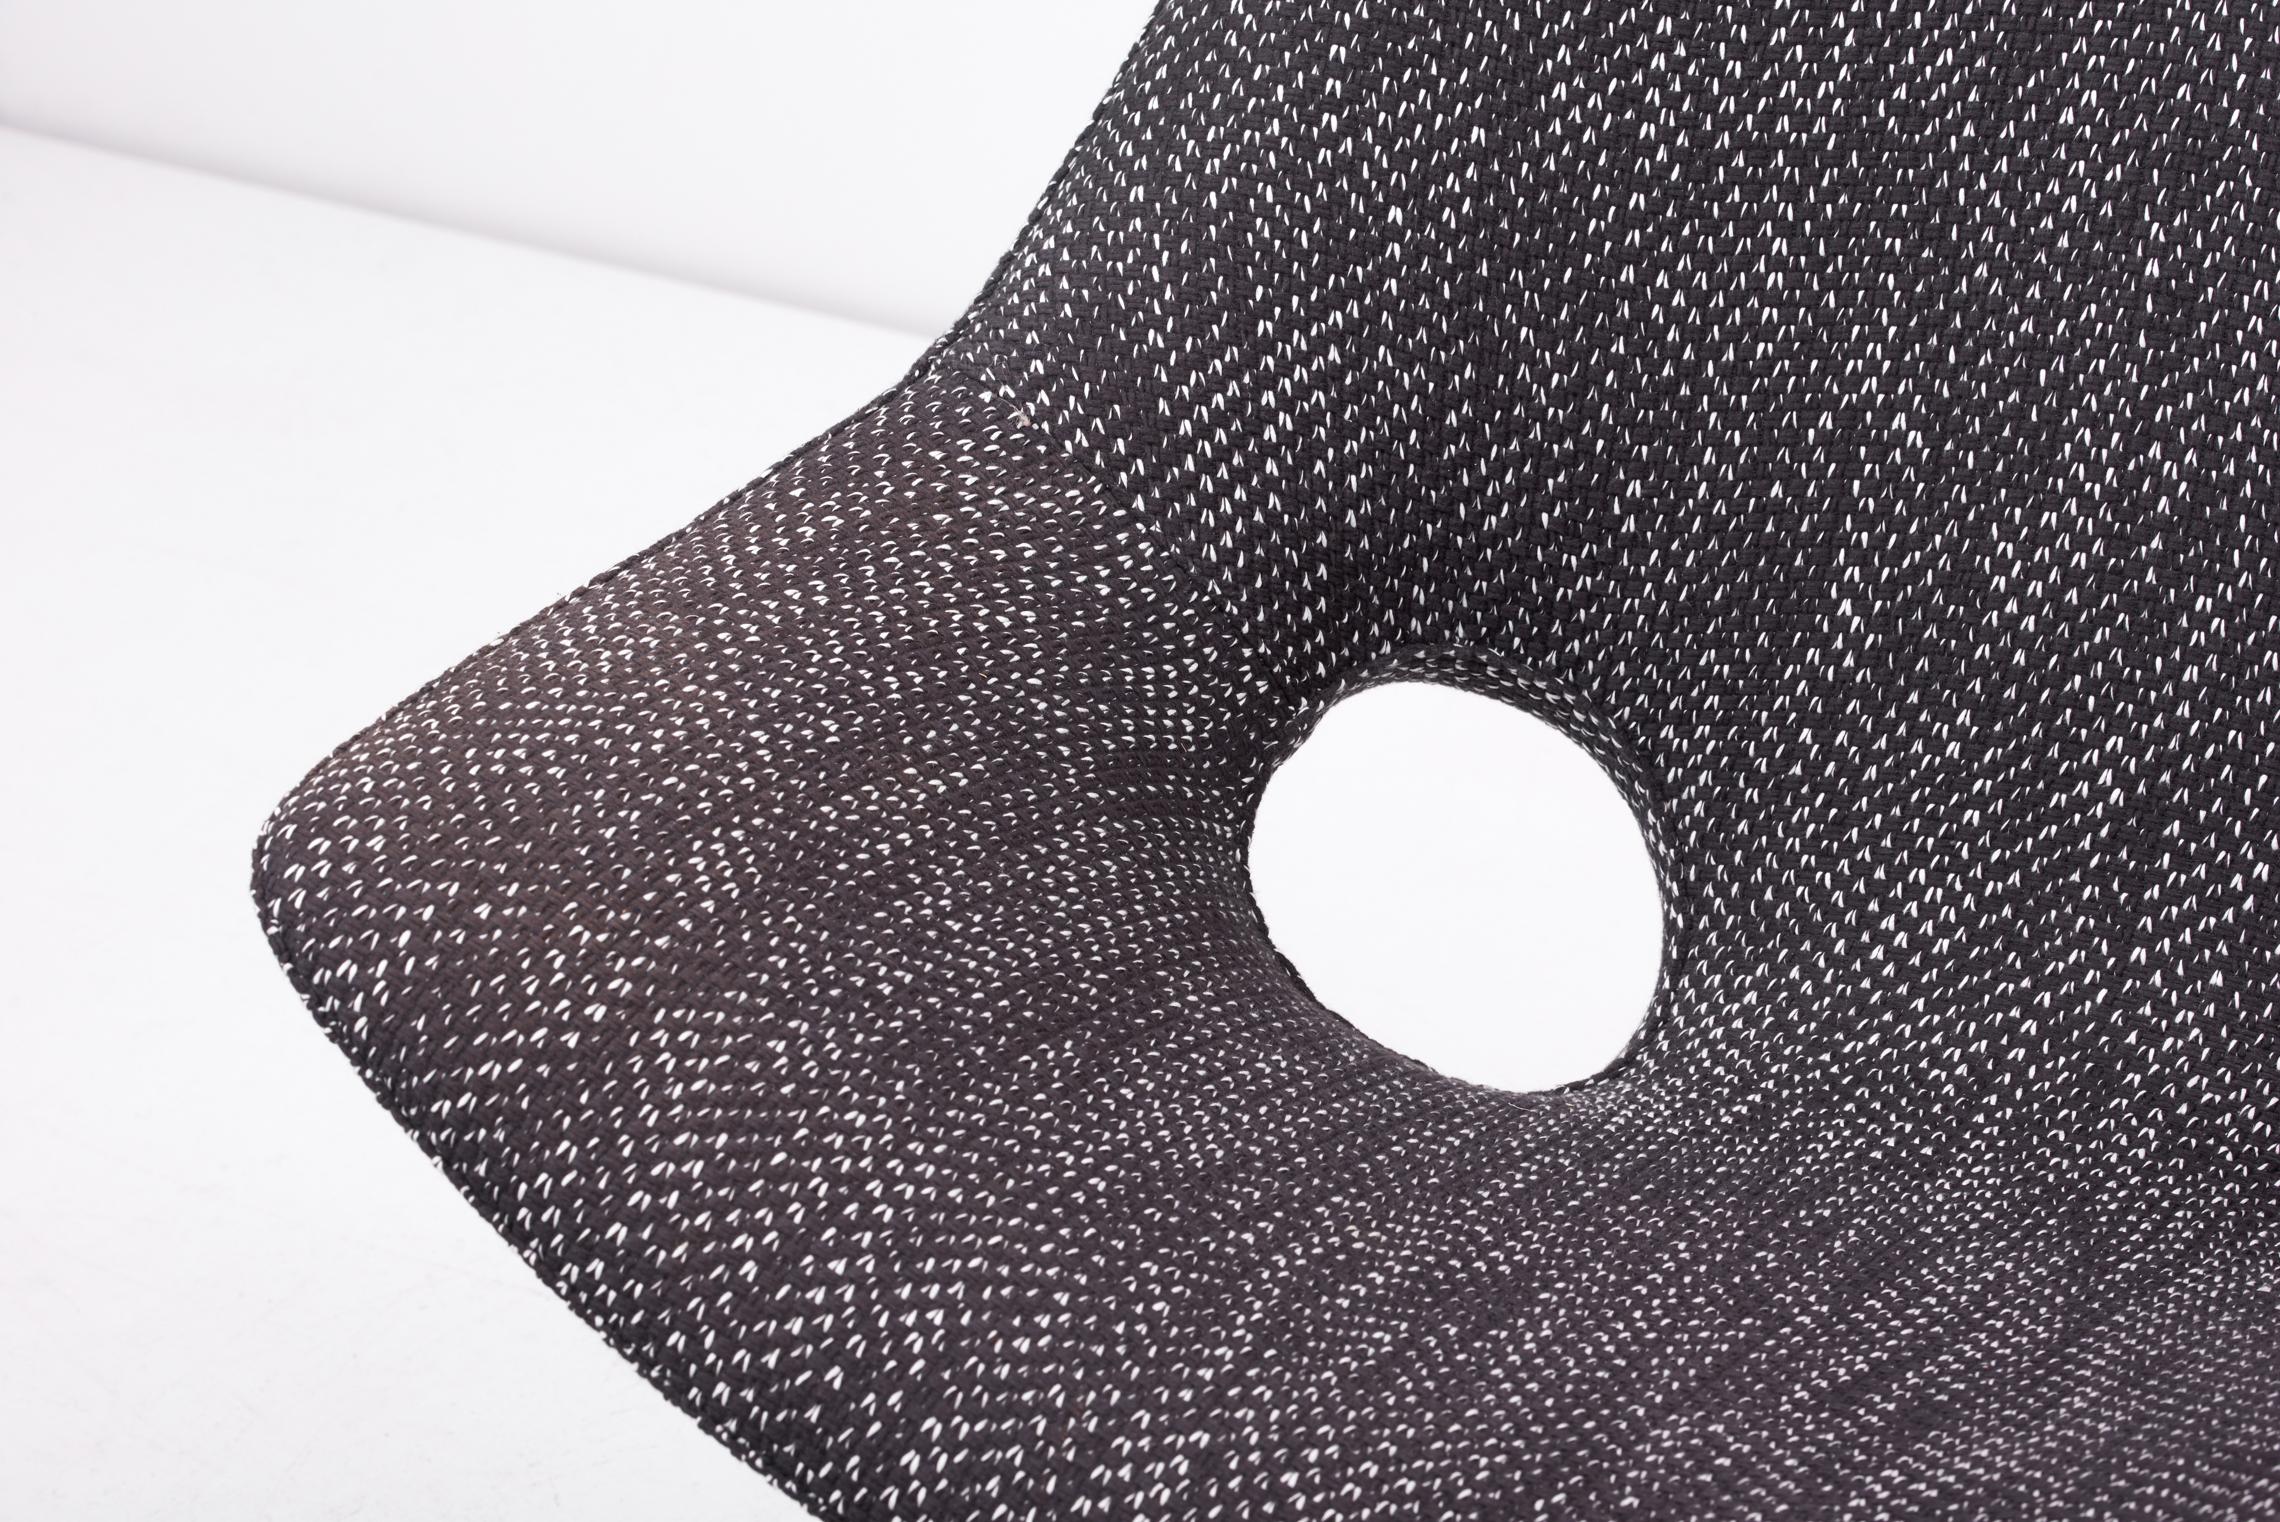 Lounge Chair by Augusto Bozzi for Saporiti in black & white fabric, Italy, 1950s For Sale 8